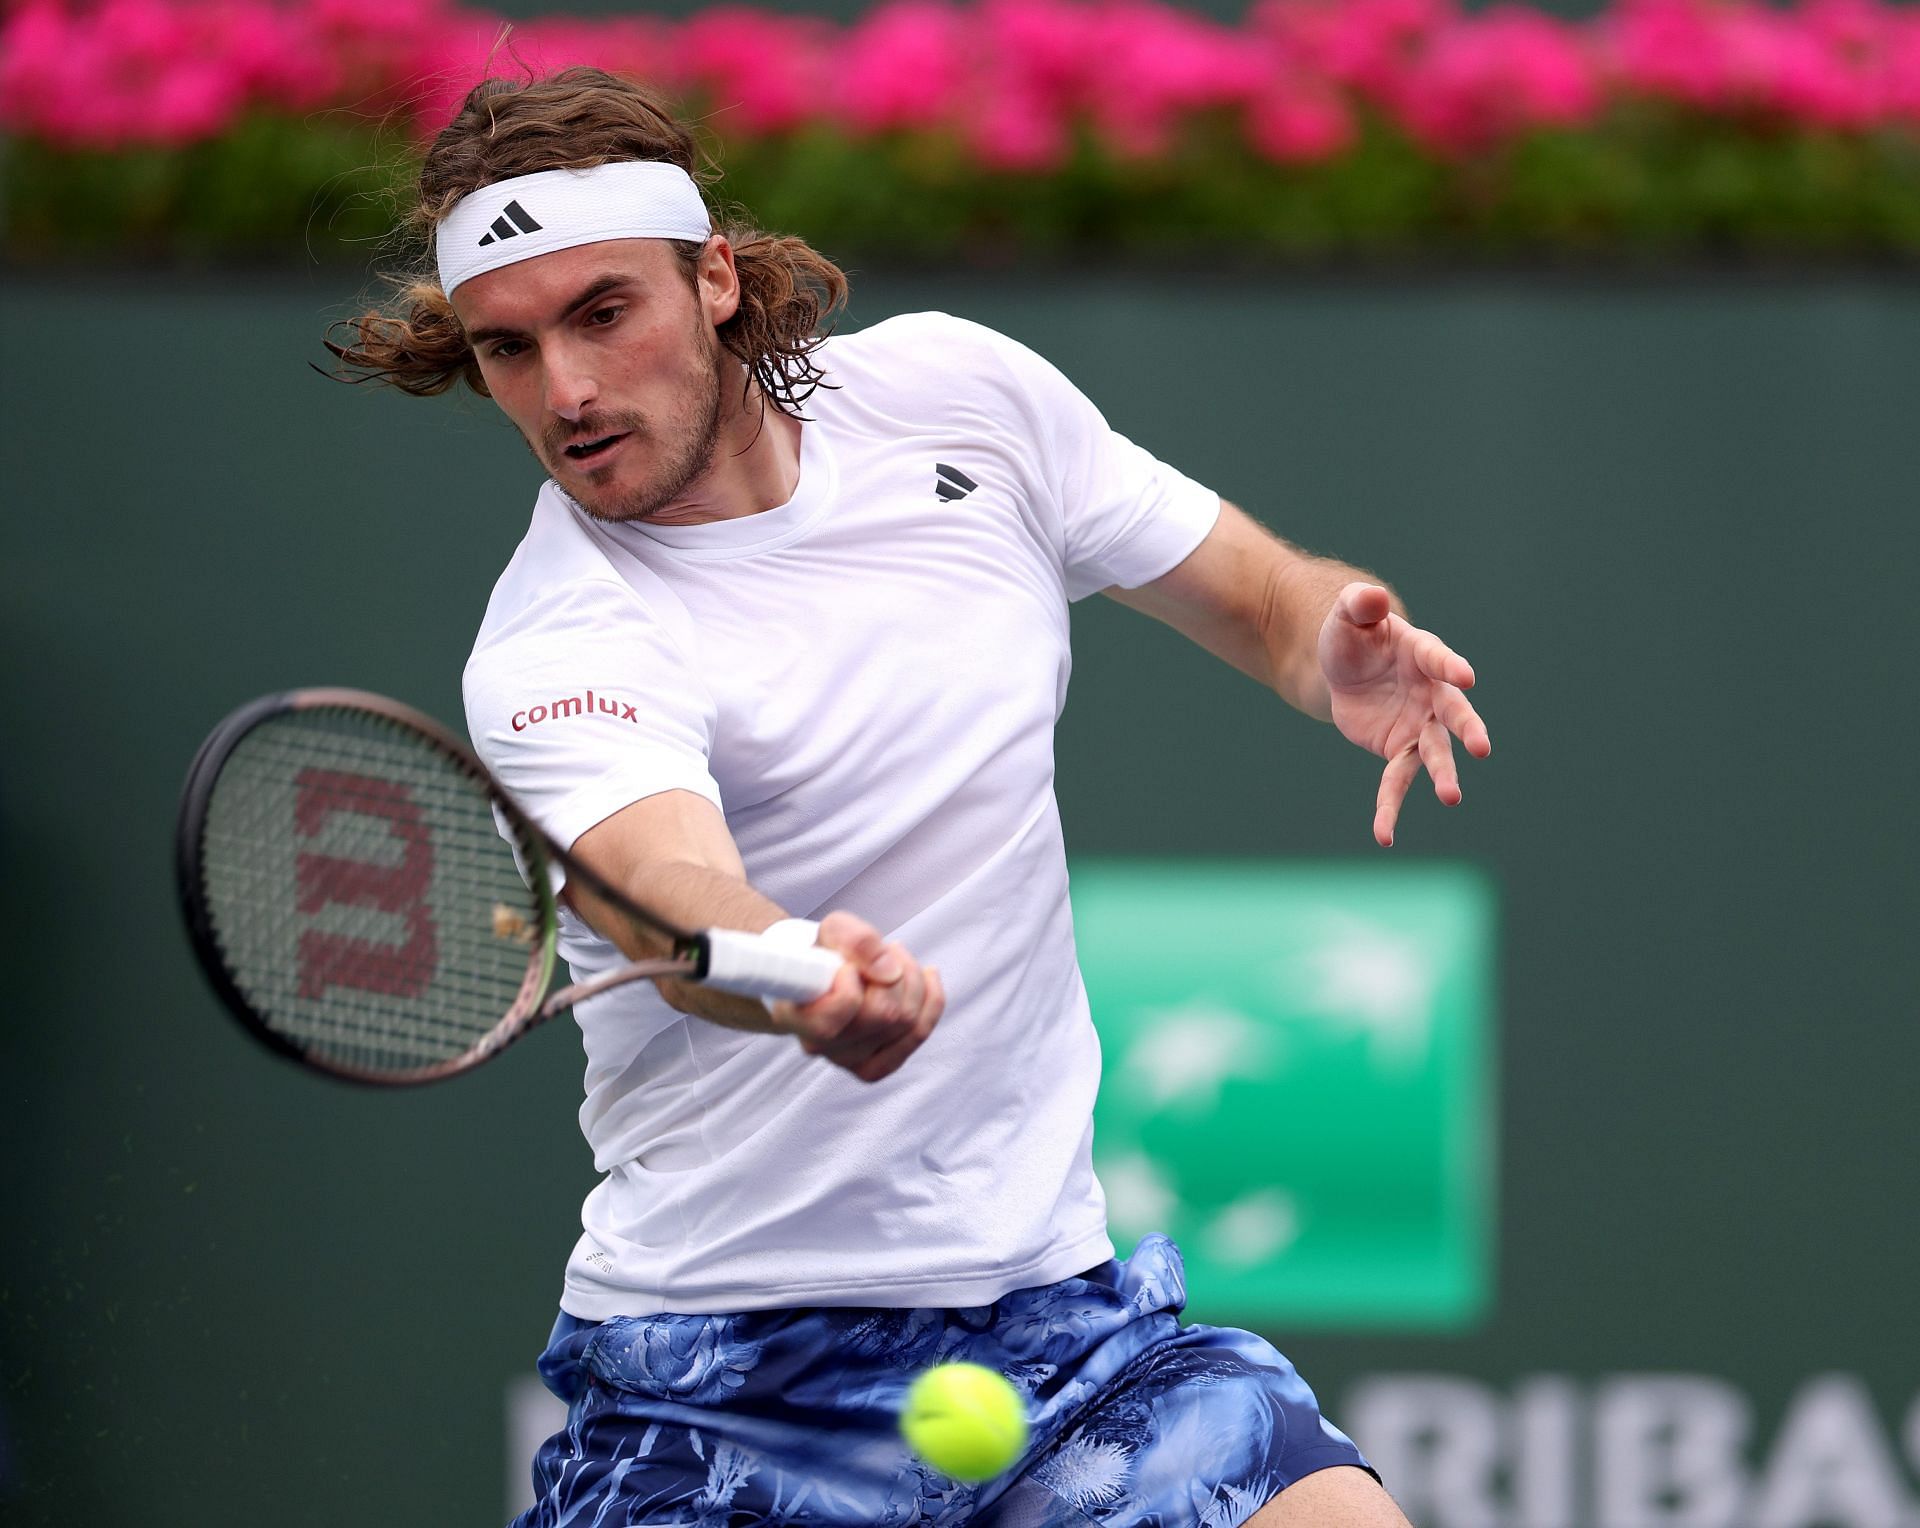 Stefanos Tsitsipas is the second seed at the Miami Masters